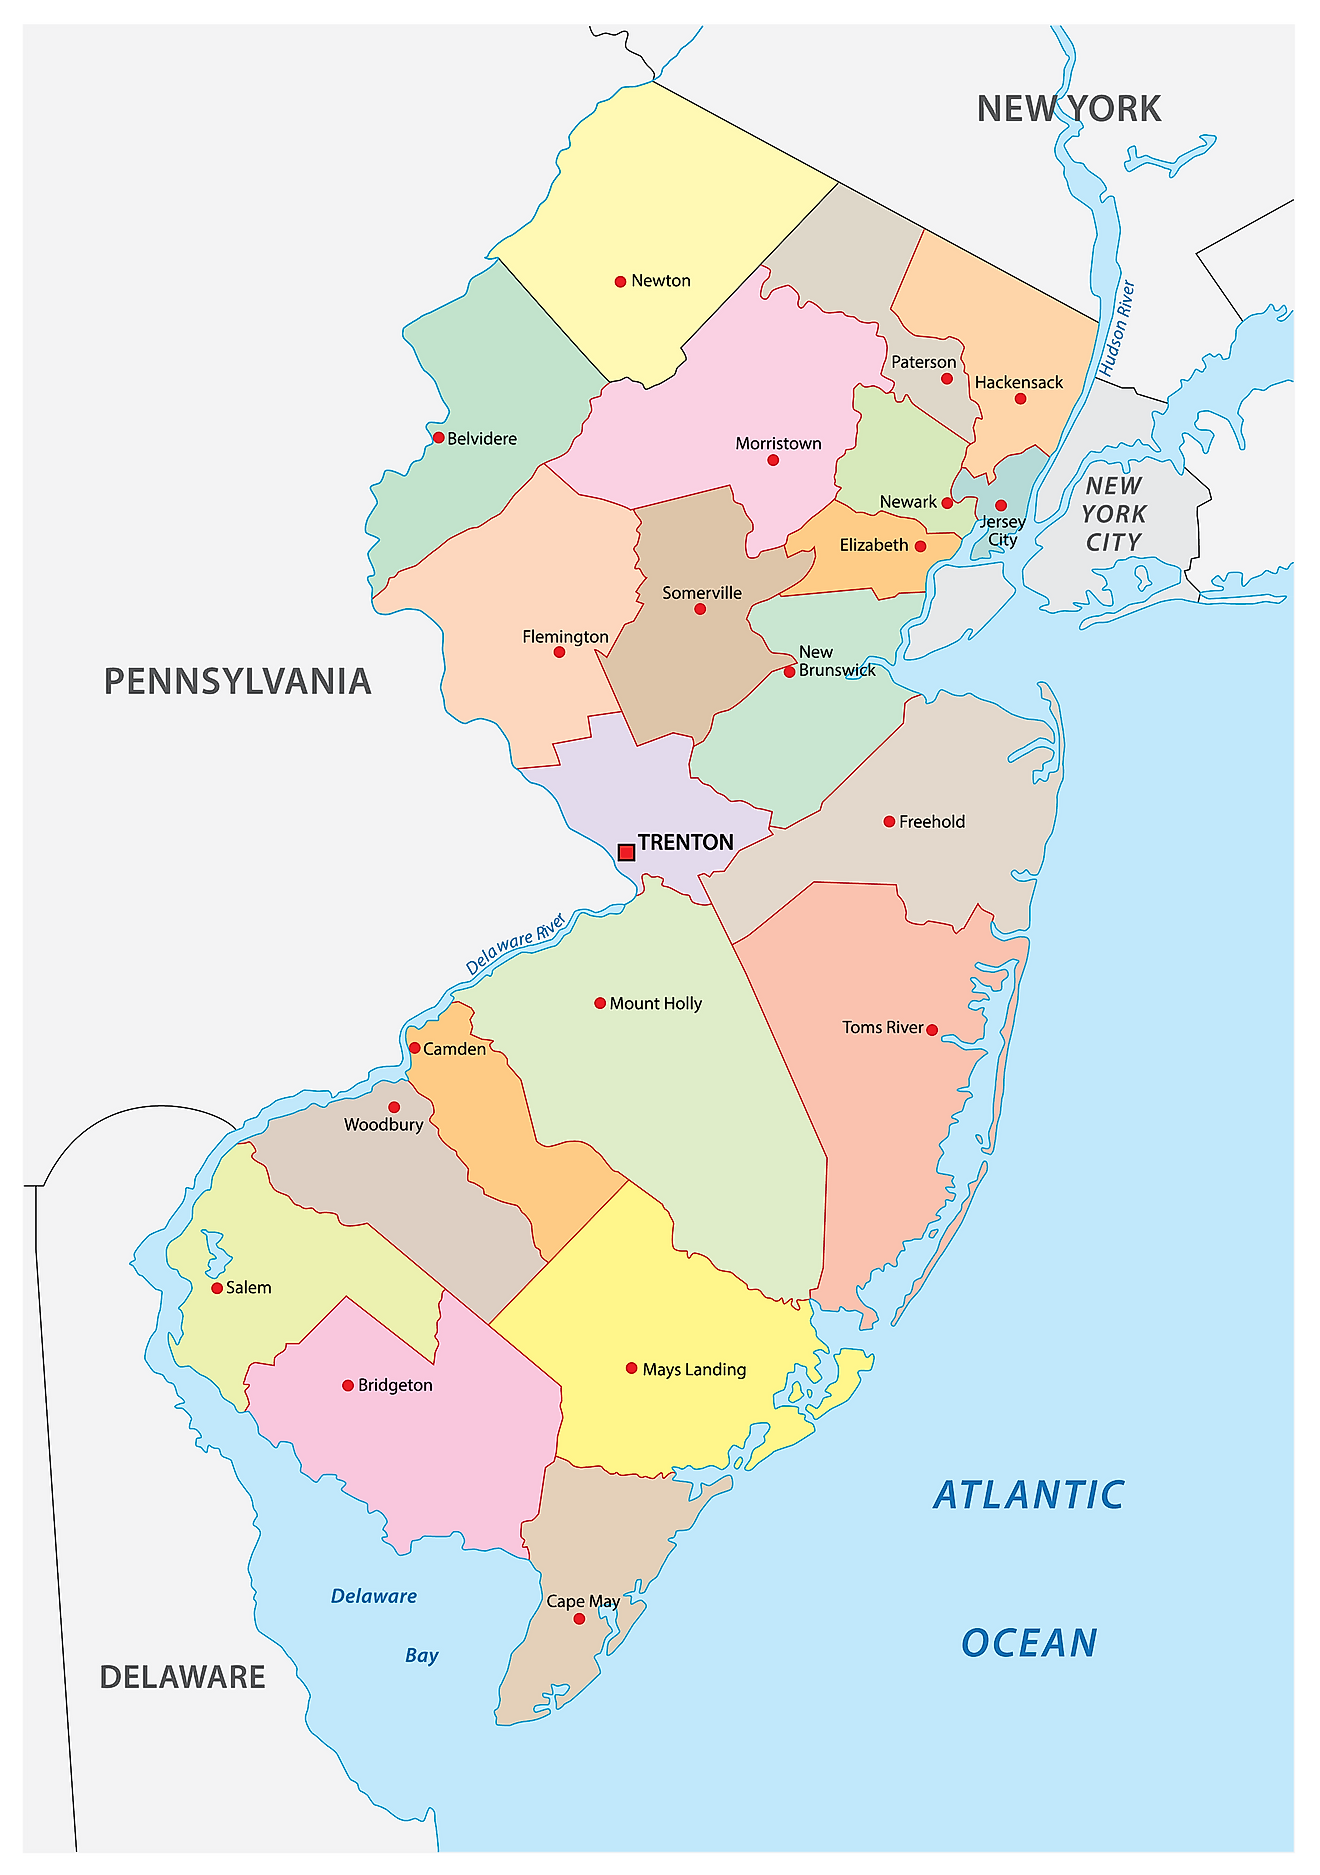 Administrative Map of New Jersey showing its 21 counties and the capital city - Trenton